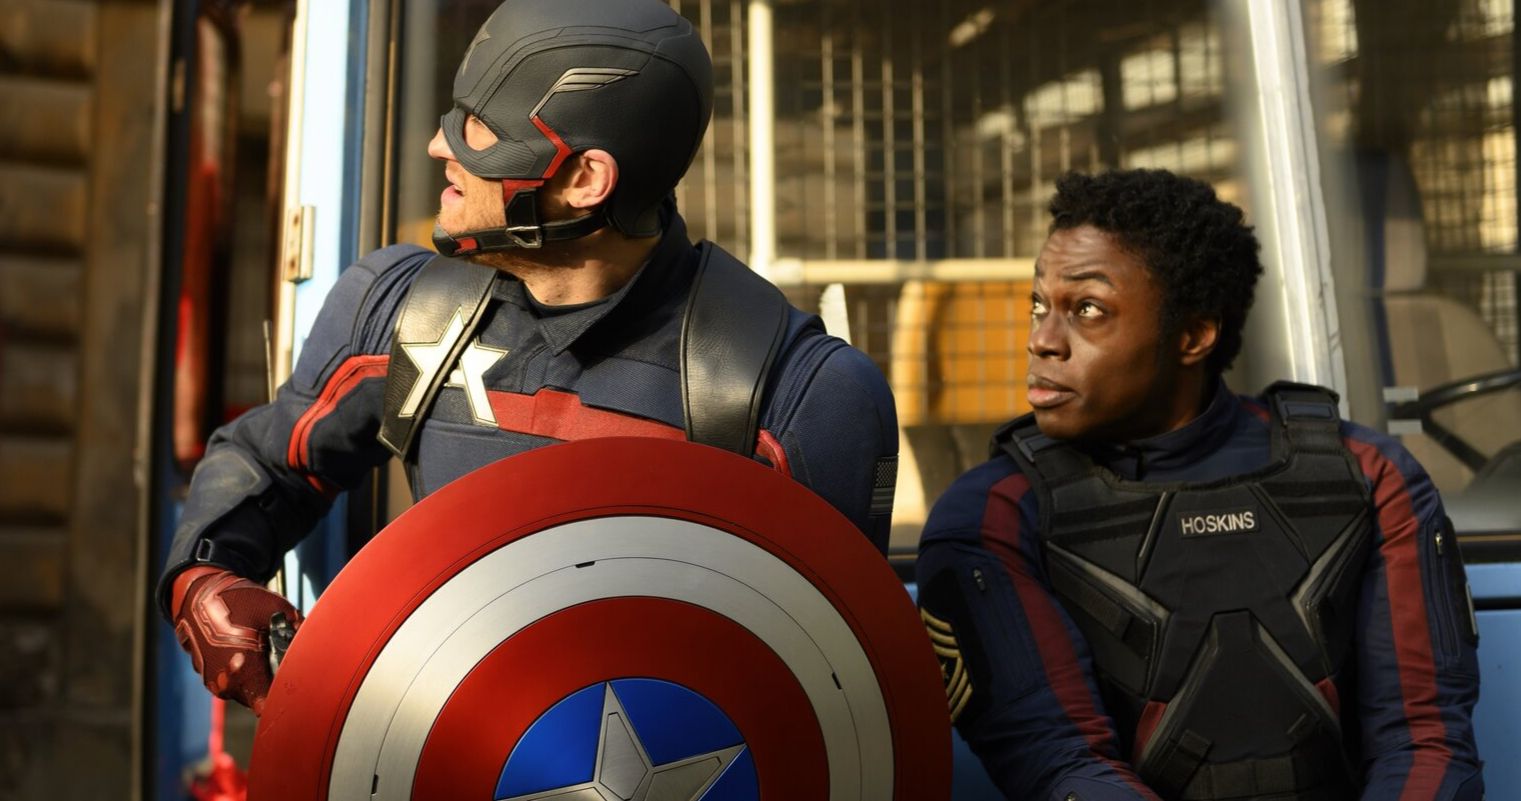 Final The Falcon and the Winter Soldier Episodes Will Introduce a Surprise New MCU Character